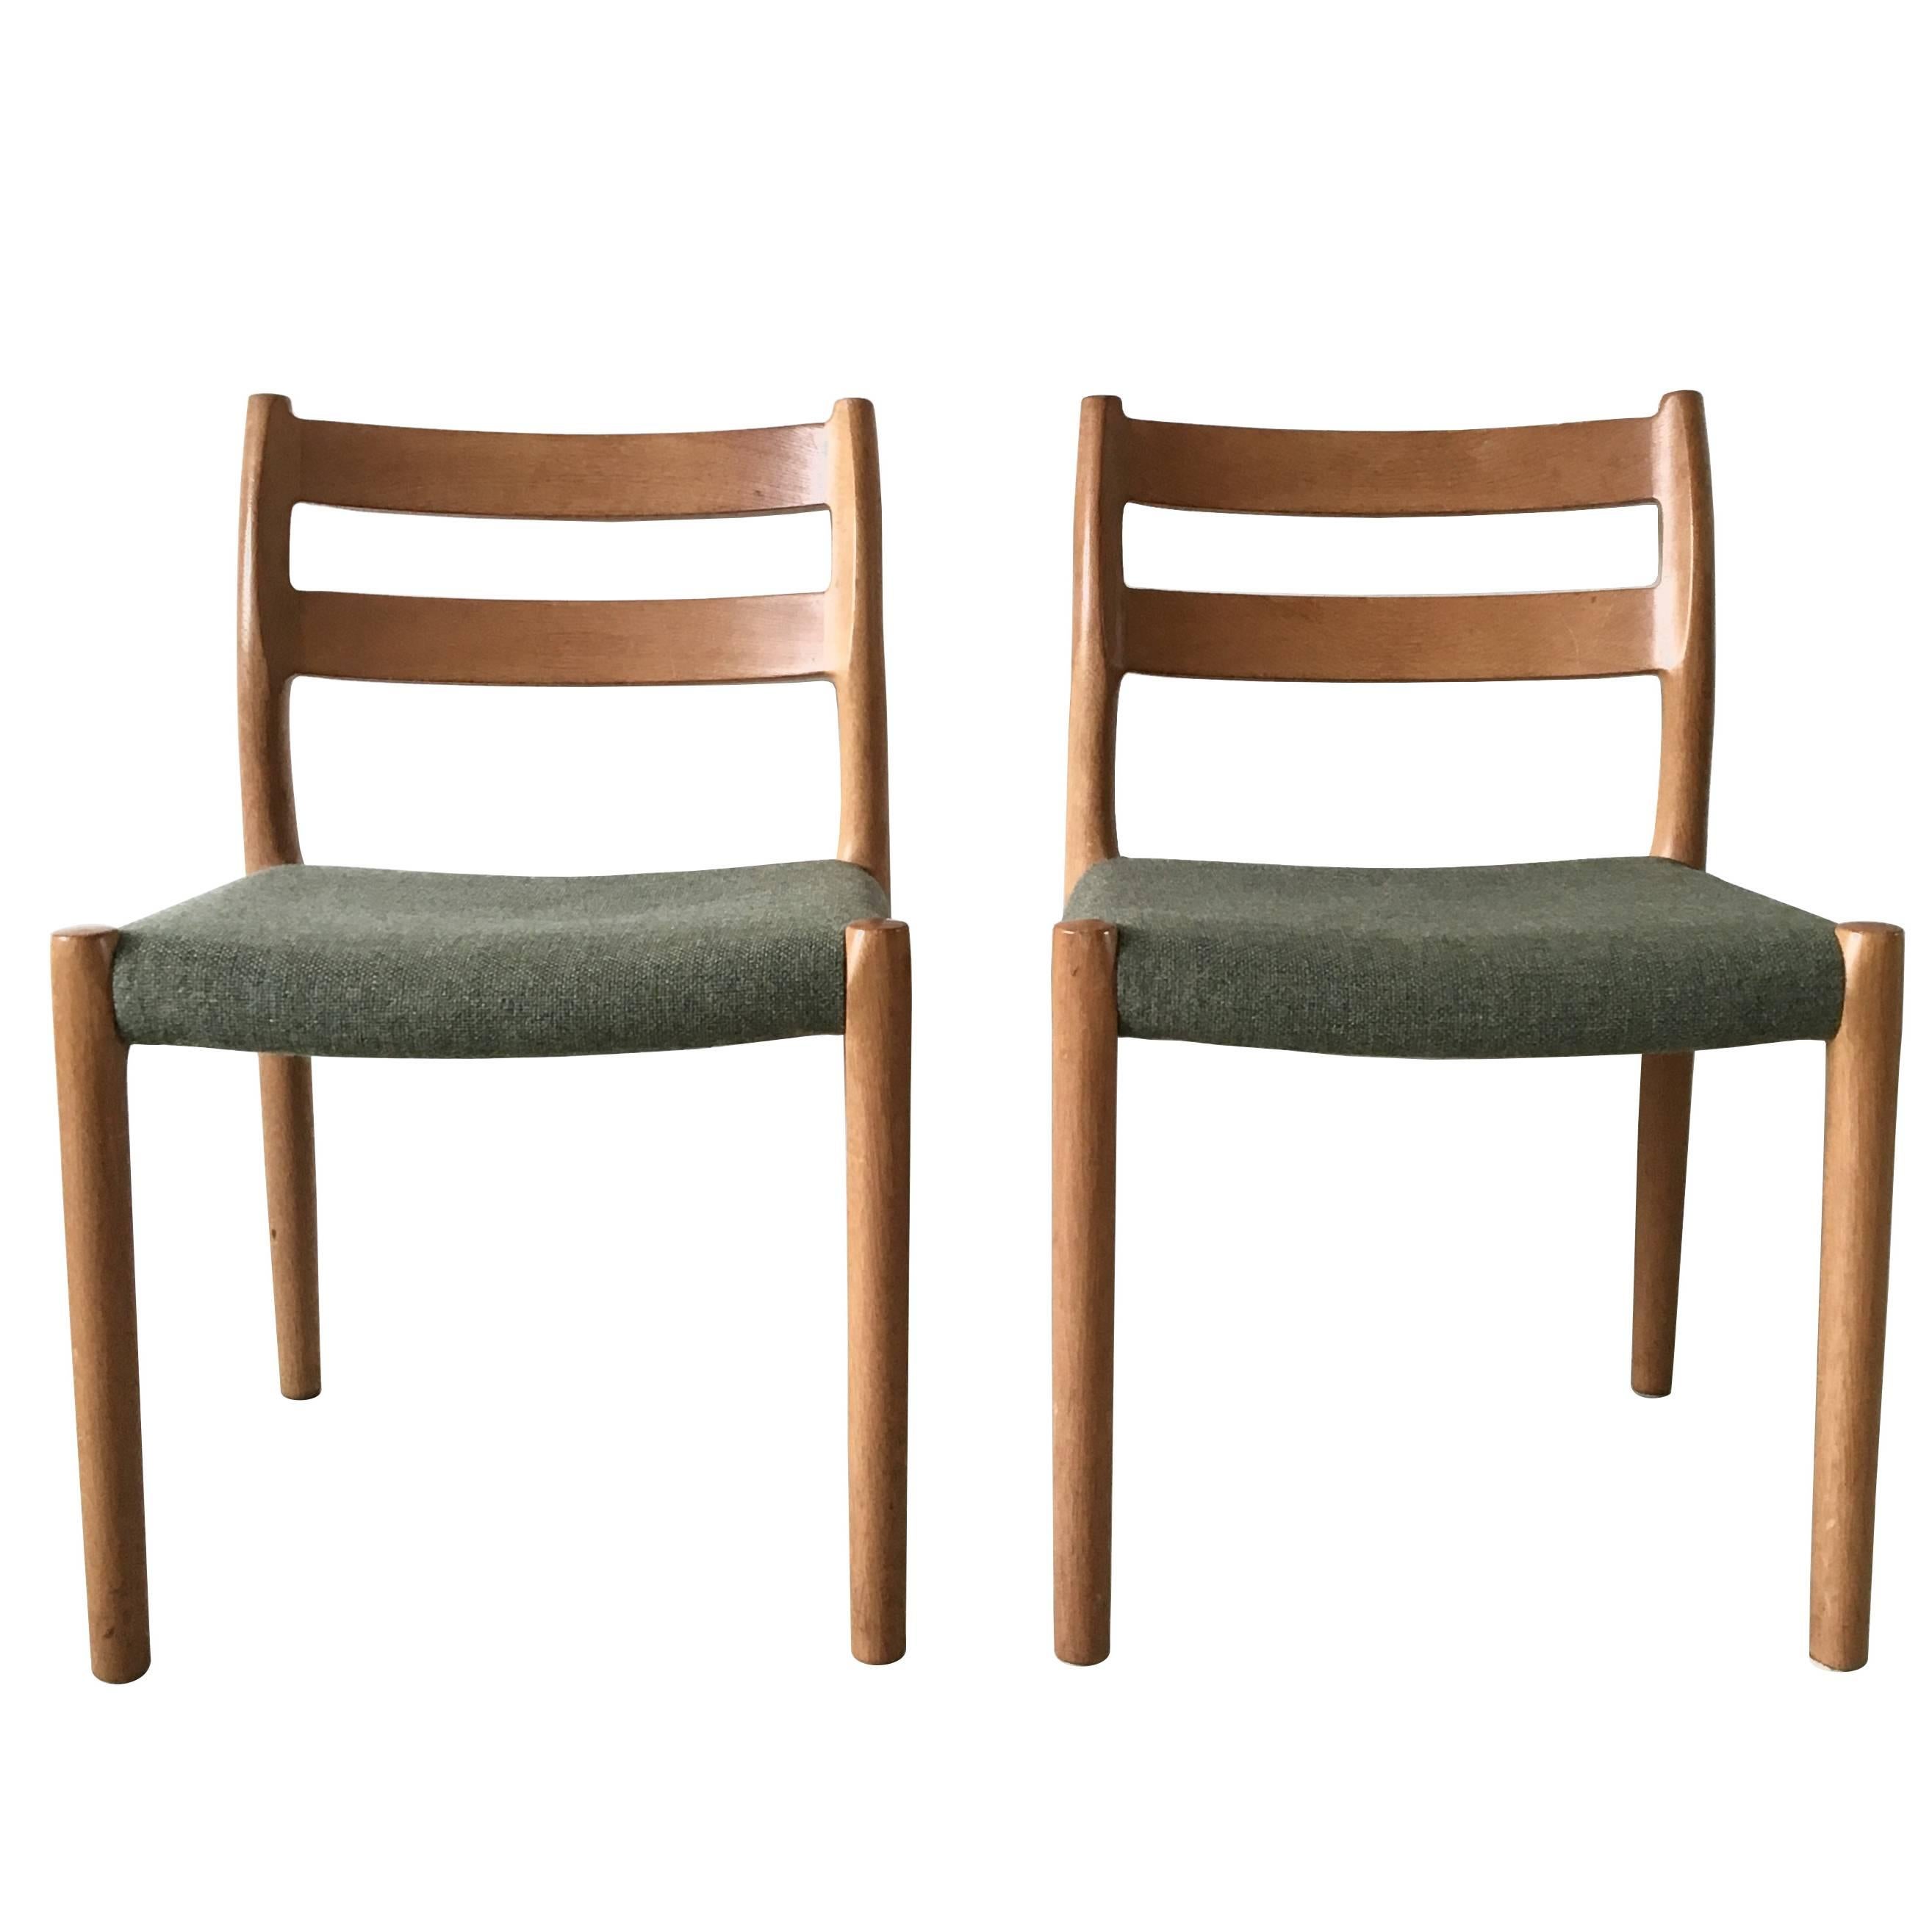 Set of Two Dining Chairs in Teak by J.L. Moller for Højbjerg, Denmark, 1960s